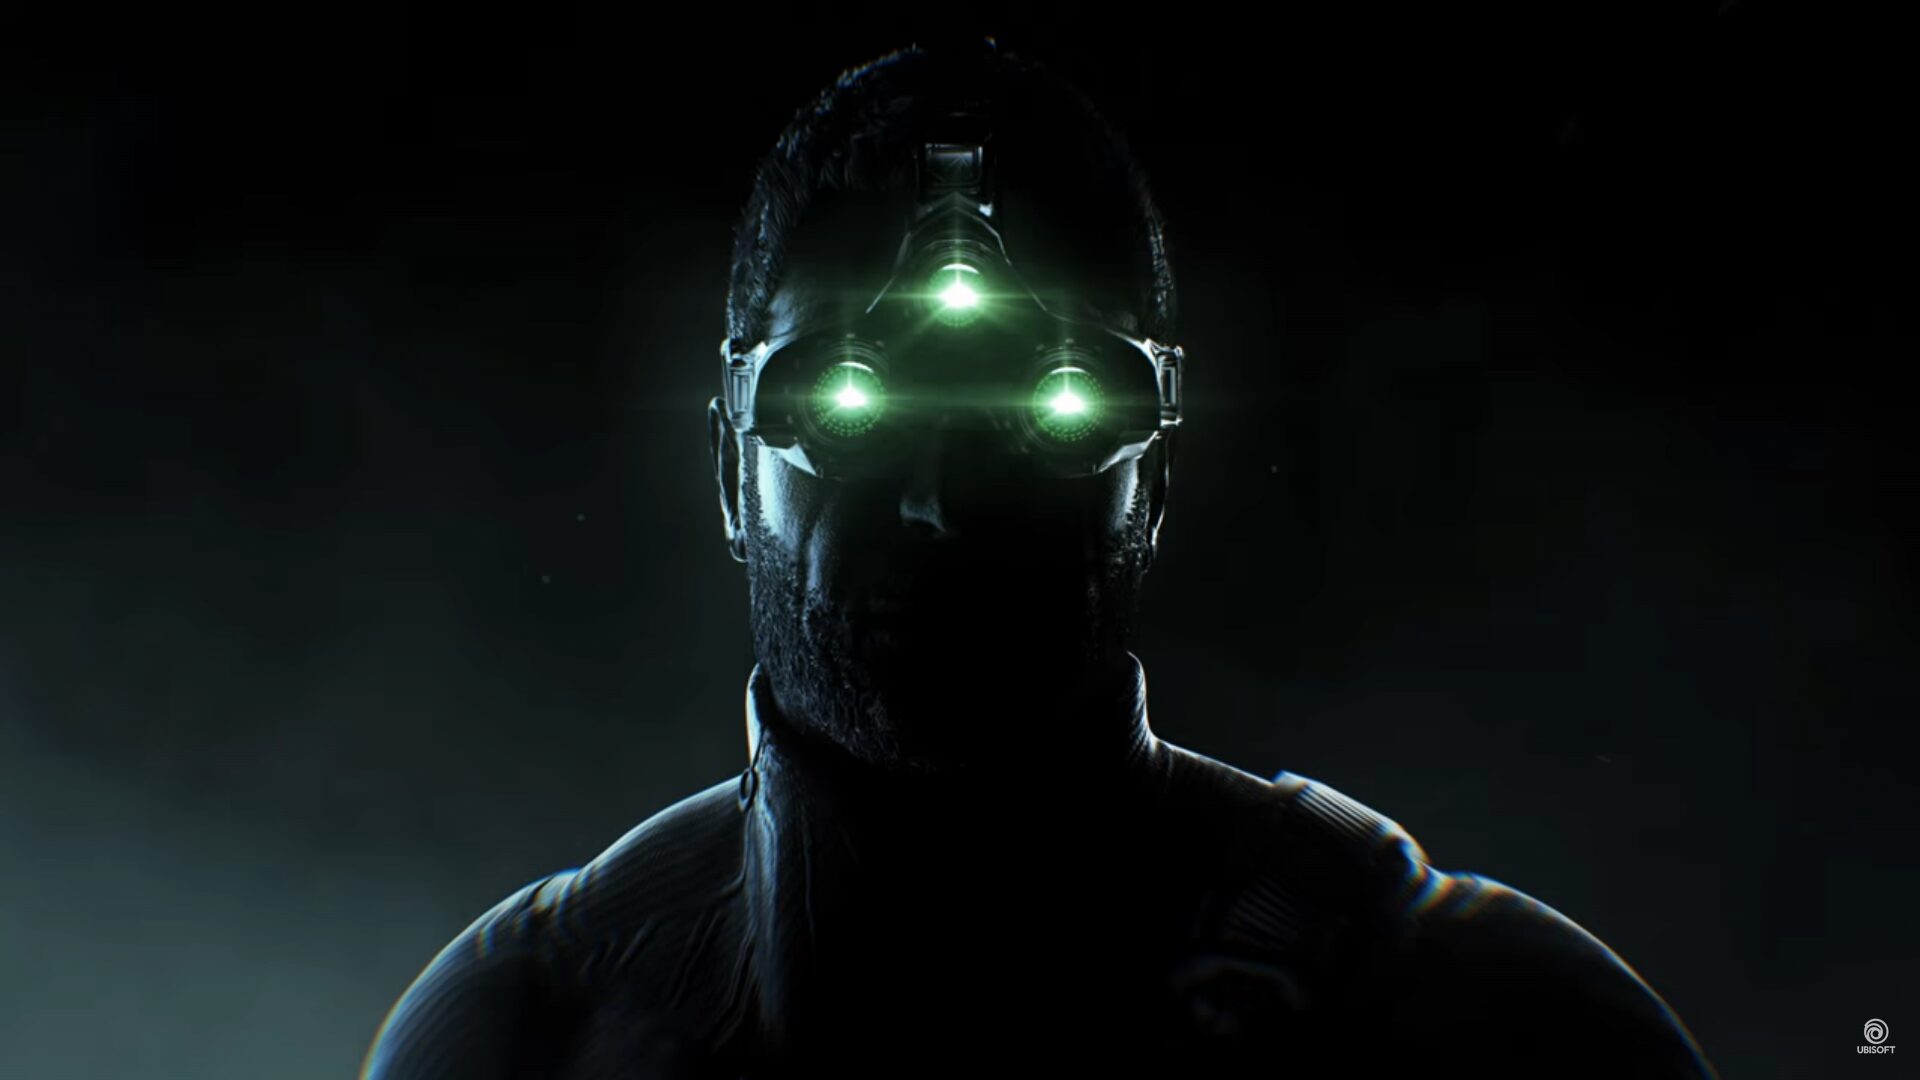 Splinter Cell’s Sam Fisher Teams Up with the Ghosts in Ghost Recon Wildlands